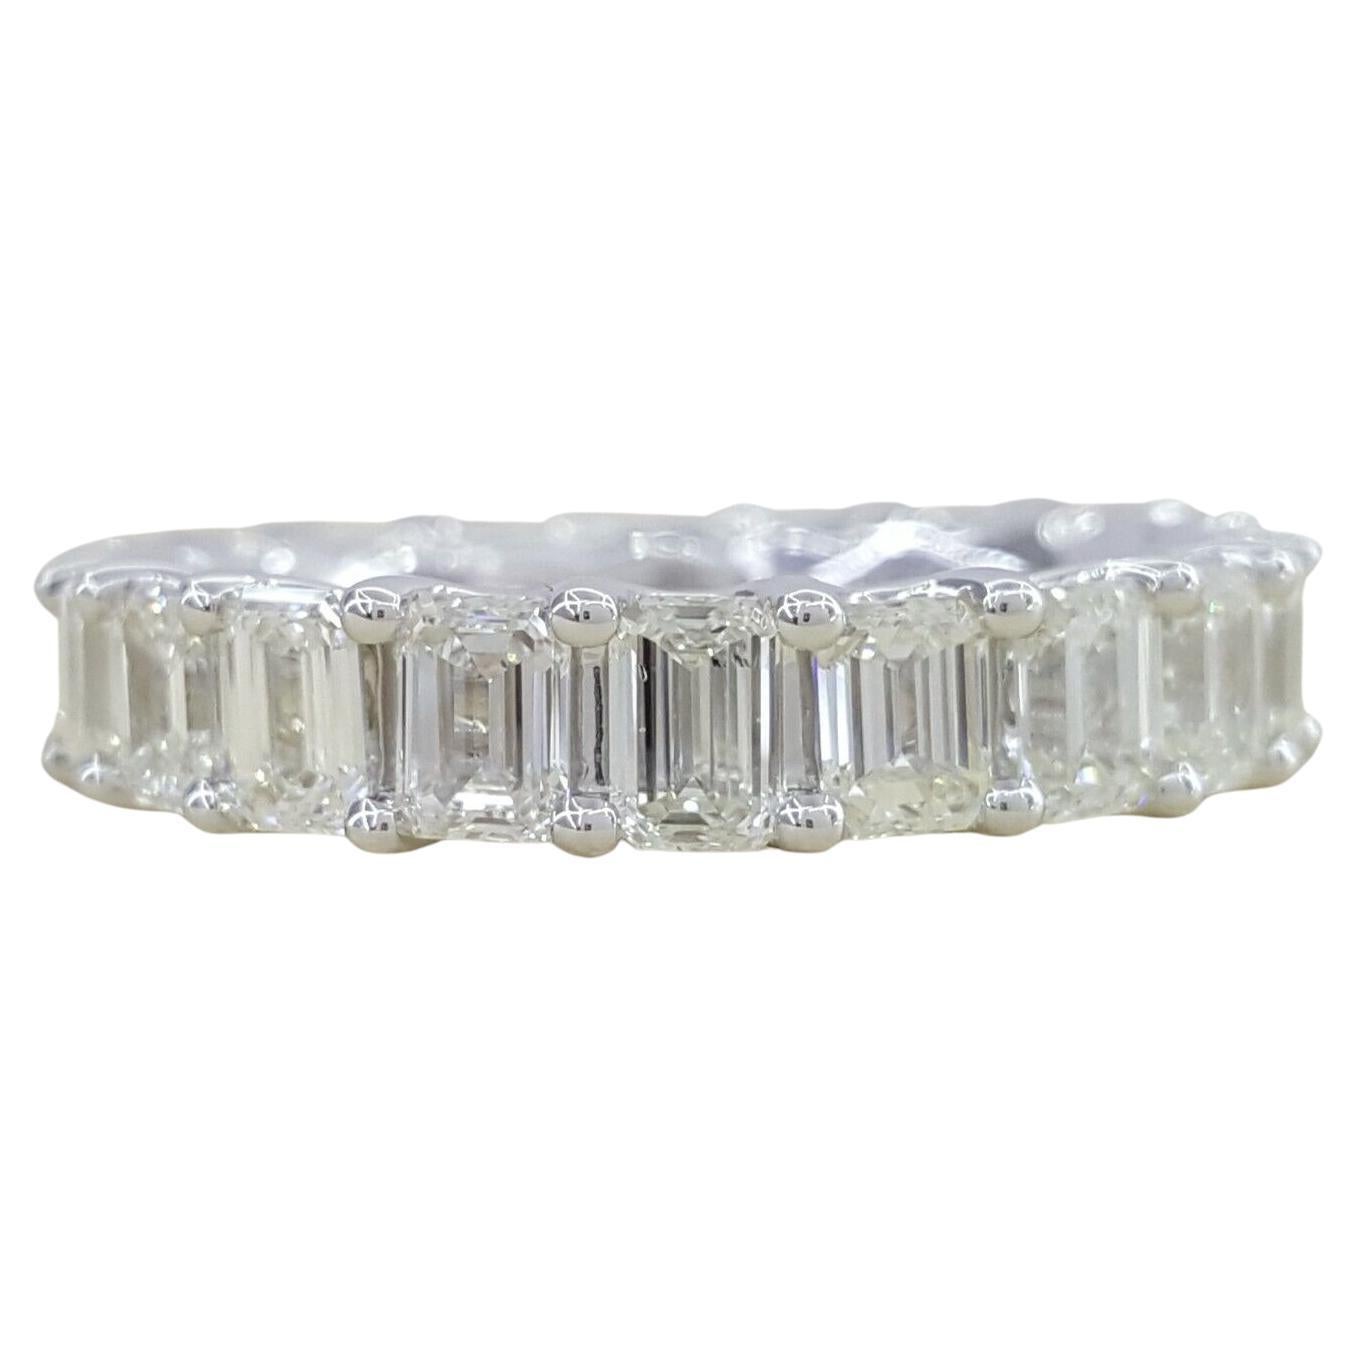 White Gold Emerald Cut Diamond Full Circle / Eternity / Wedding Band / Anniversary Ring 4.6 mm wide.



The ring weighs 5.5 grams, size 6.75, there are 20 Natural Emerald Cut Diamonds weighing approximately 4 ct, G-I in color, VS1-VS2 in clarity.